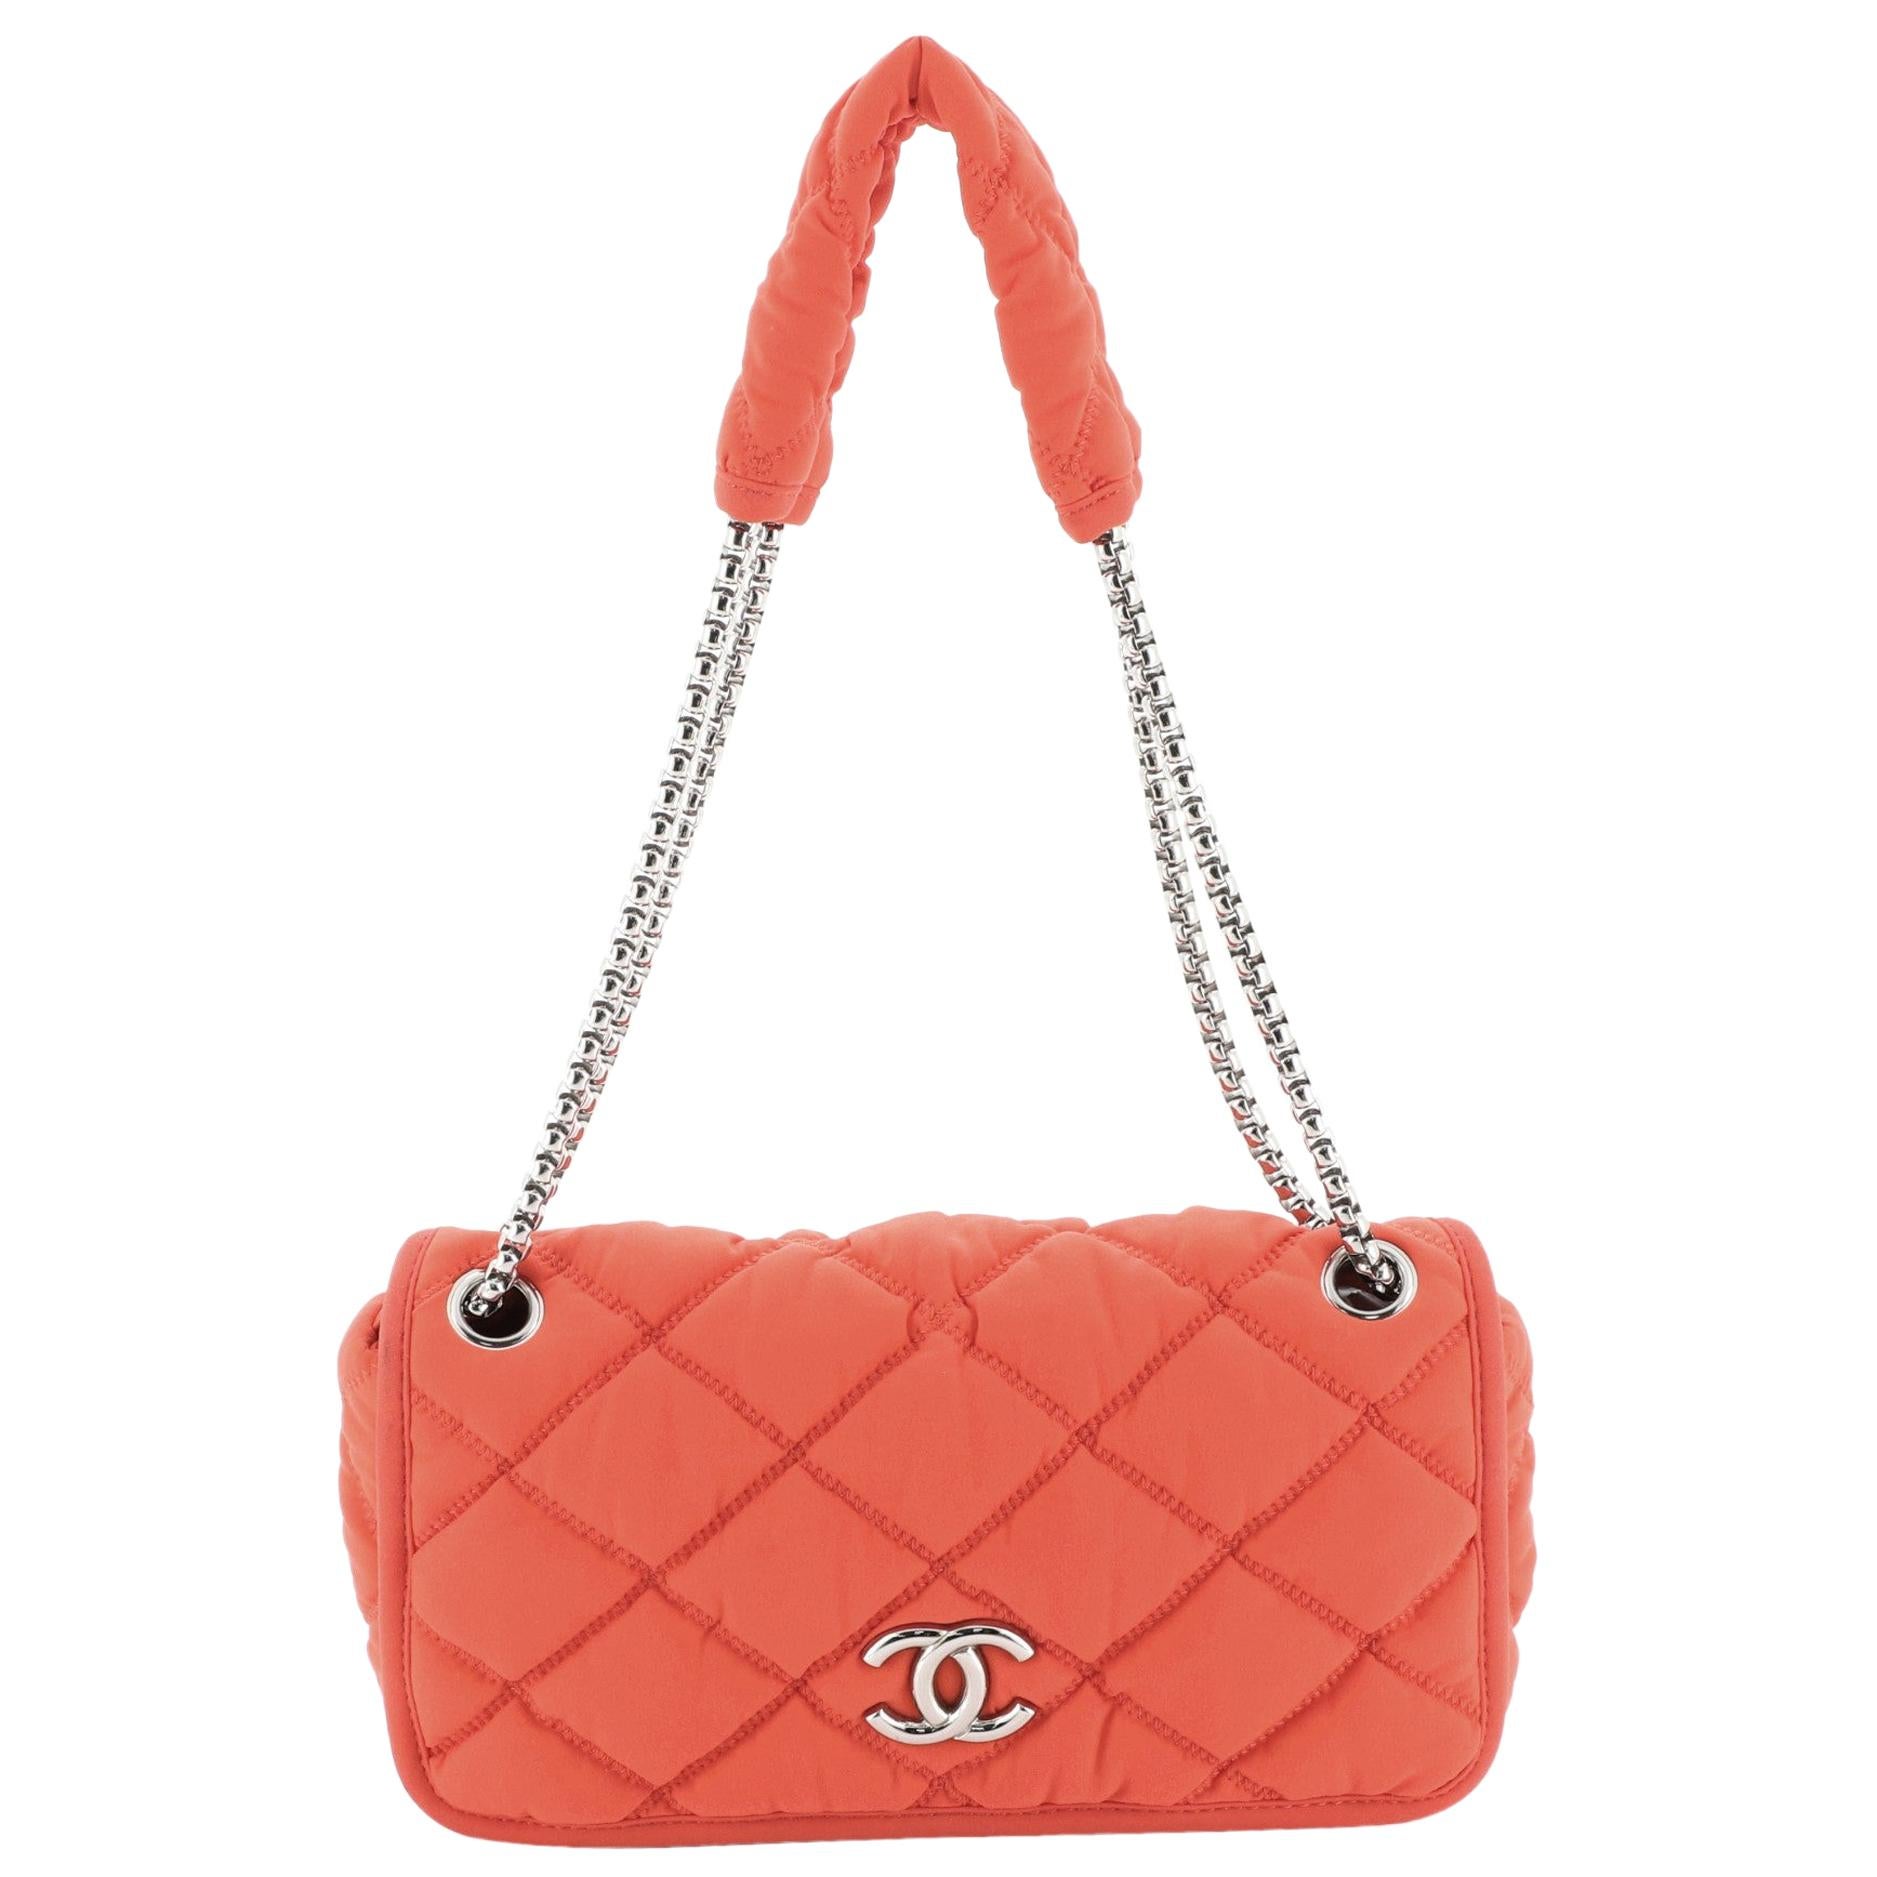 Chanel Bubble Flap Bag Quilted Nylon Medium